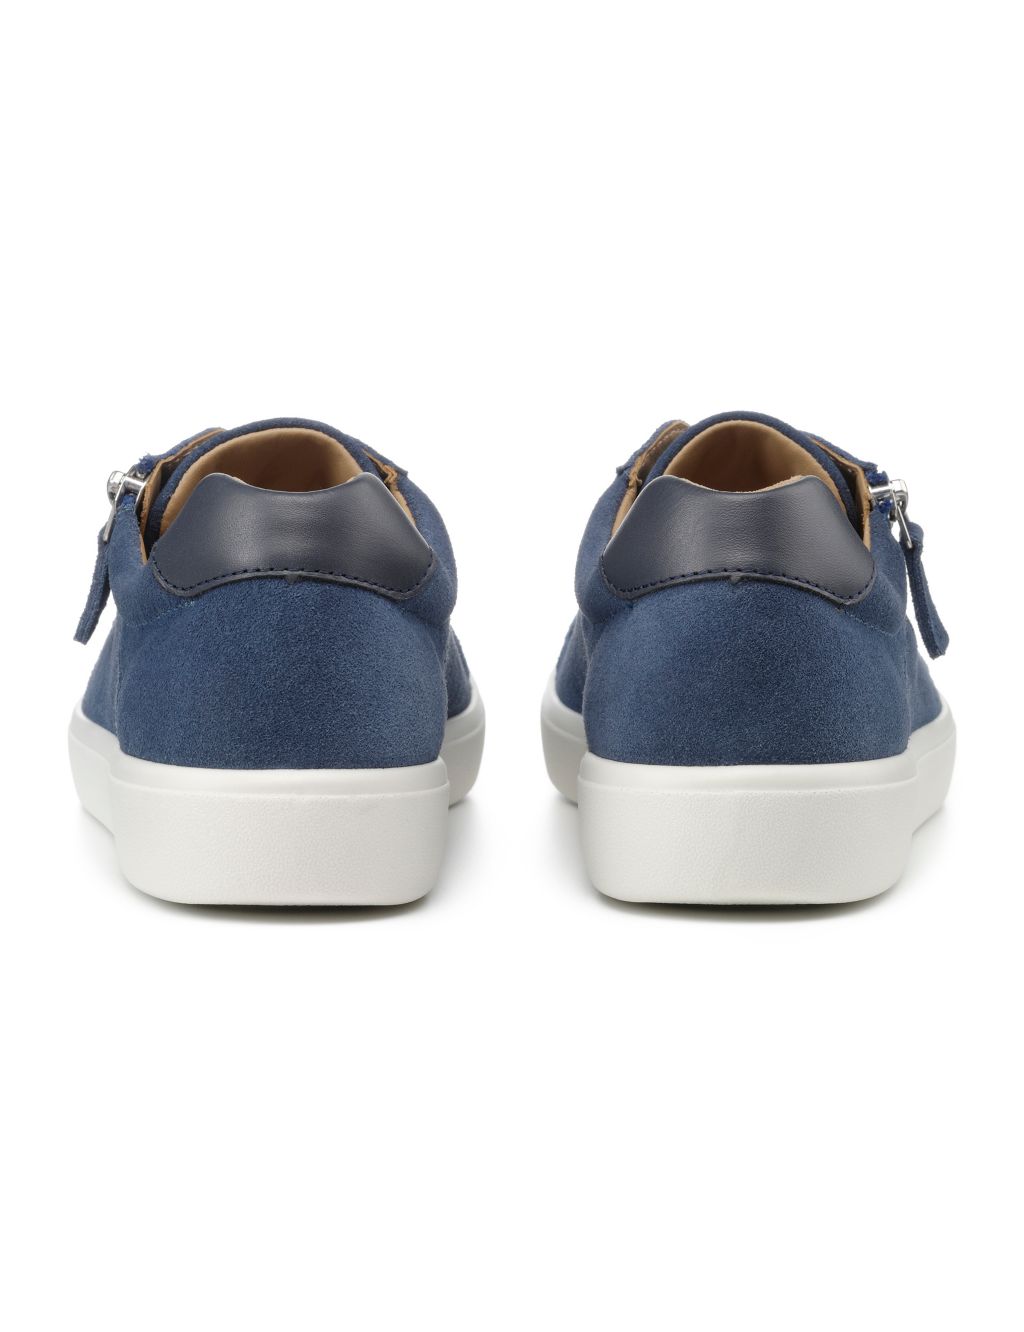 Chase II Suede Slip On Flat Trainers image 4